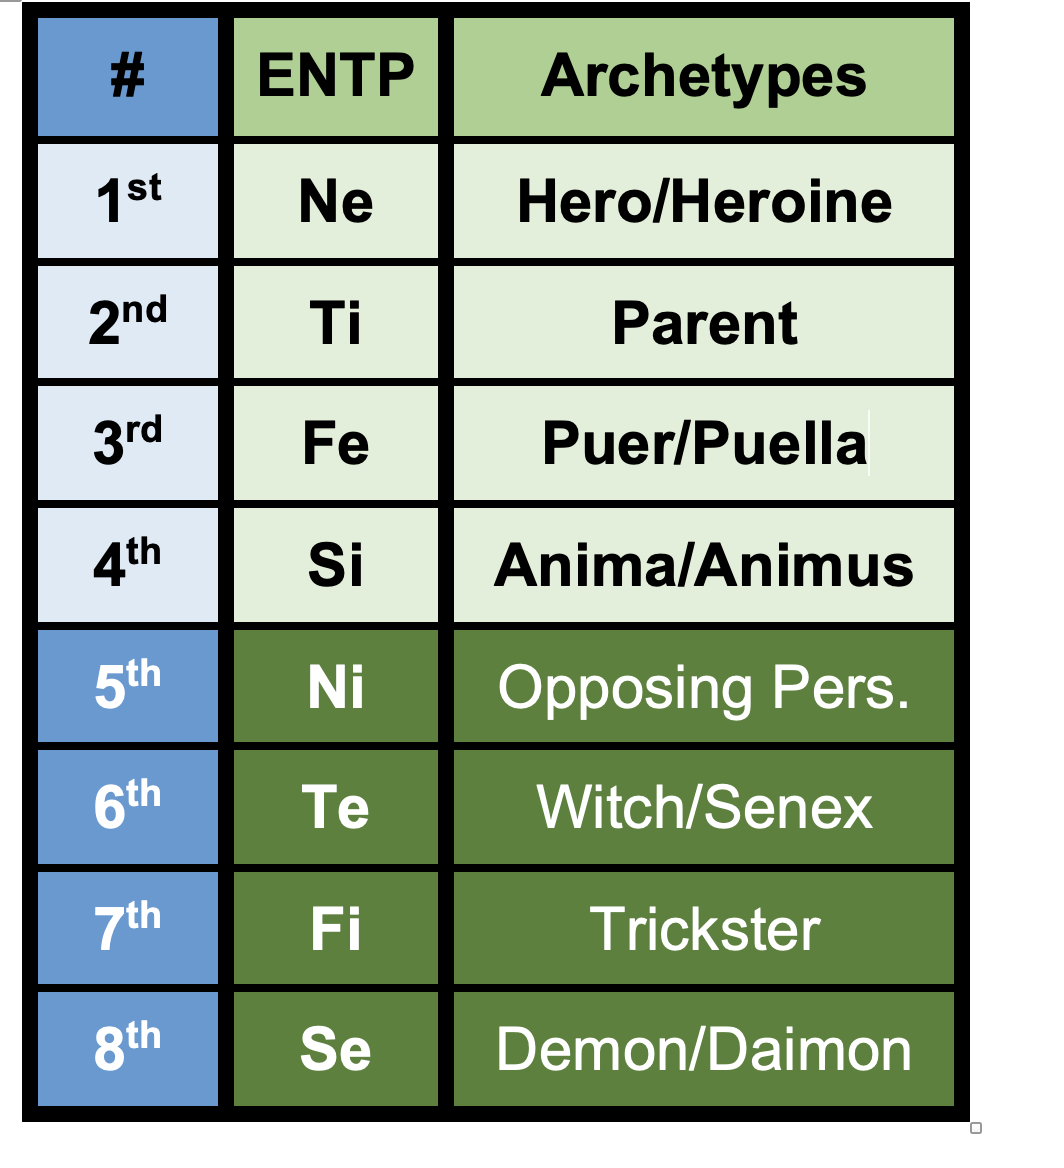 ENTP functions and archetypes according to the Beebe model.